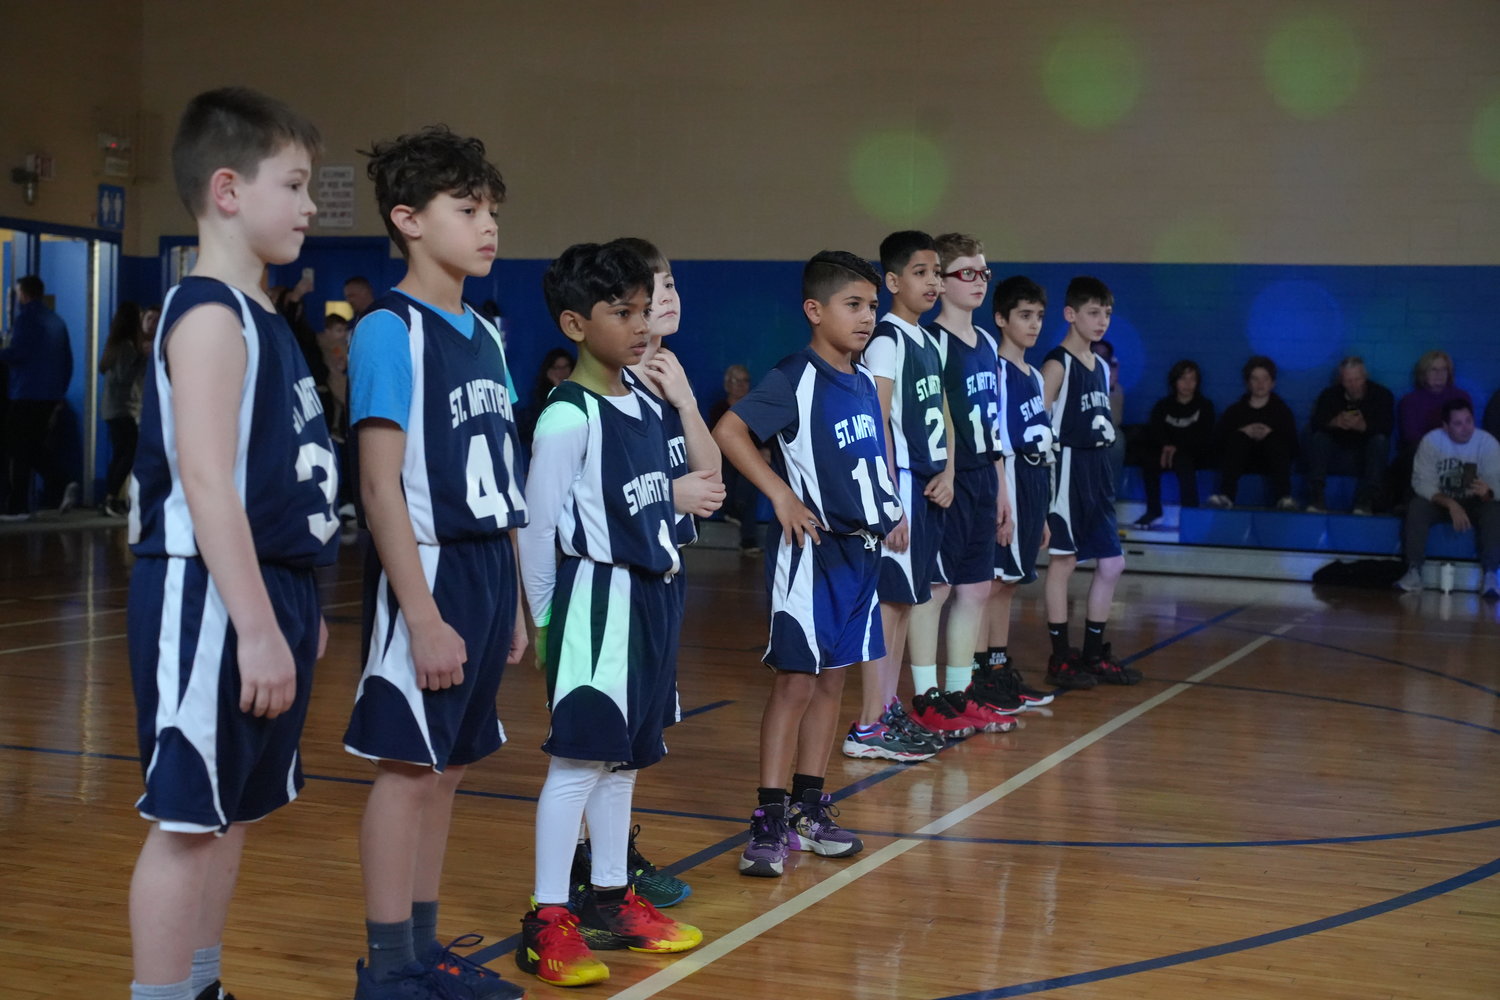 The fifth-grade team from St. Matthew’s, in Dix Hills, was the focus of strobe-lit attention before they played St. Martin of Tours, from Bethpage.